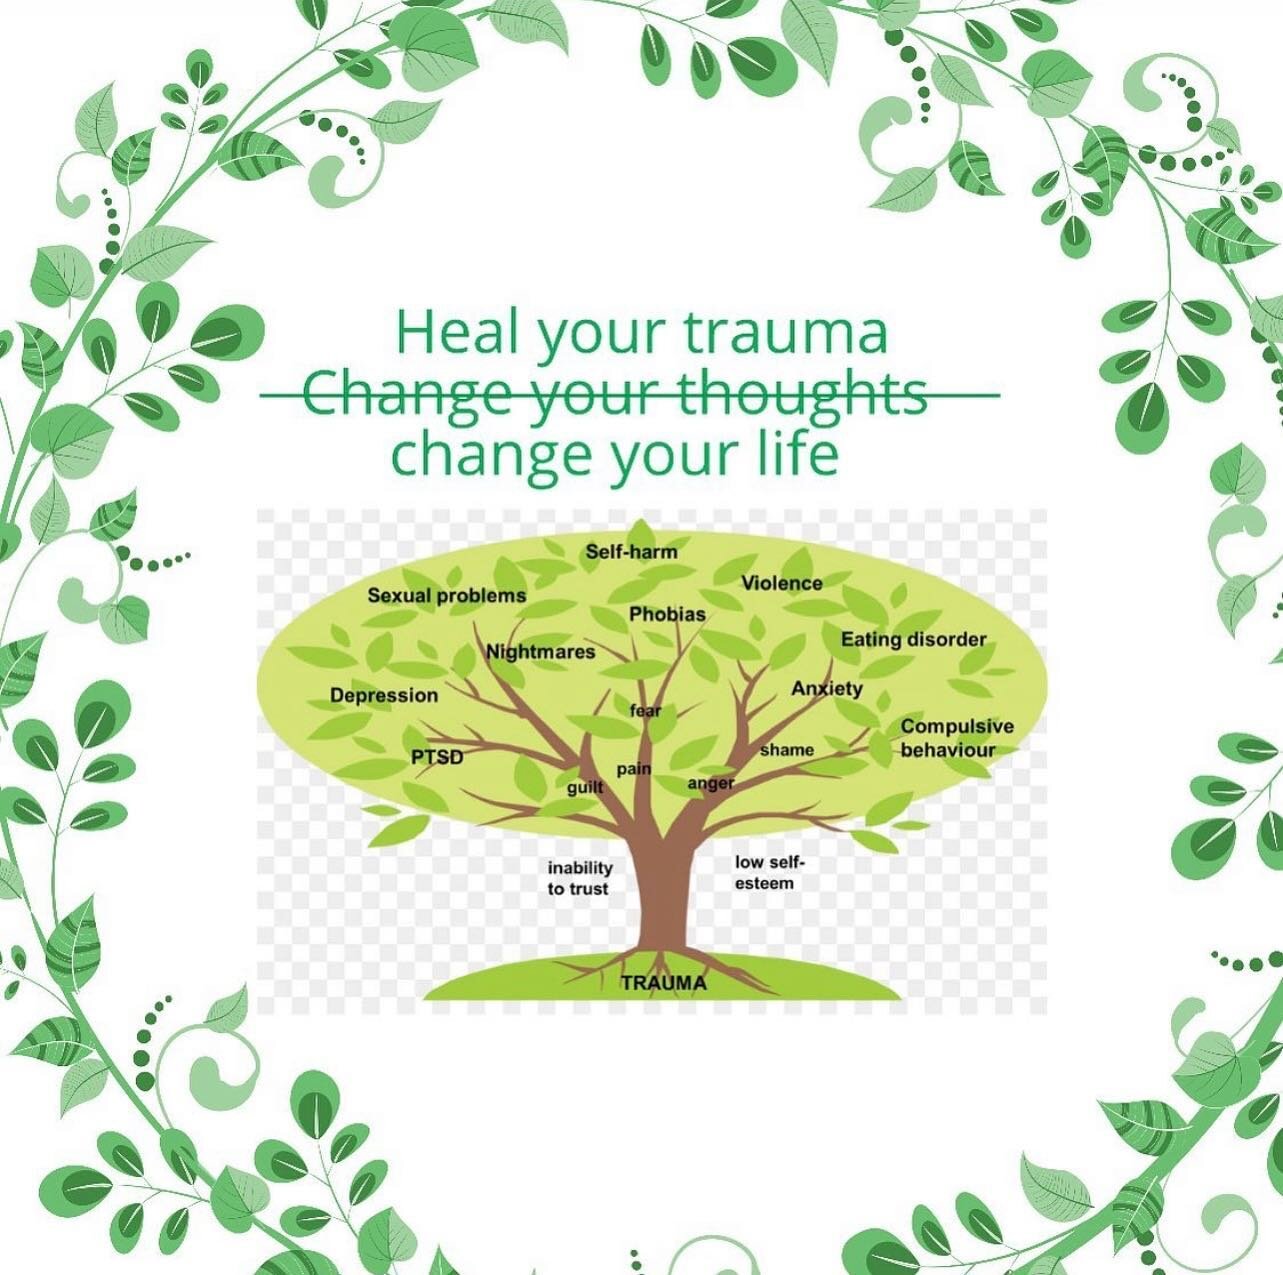 Uncomfortable thoughts and feelings are typically either survival responses based on experience, or they are wise wake up calls that something needs attention. So, to change your thoughts, you&rsquo;ve got to heal your trauma.

#mentalhealth #therapi